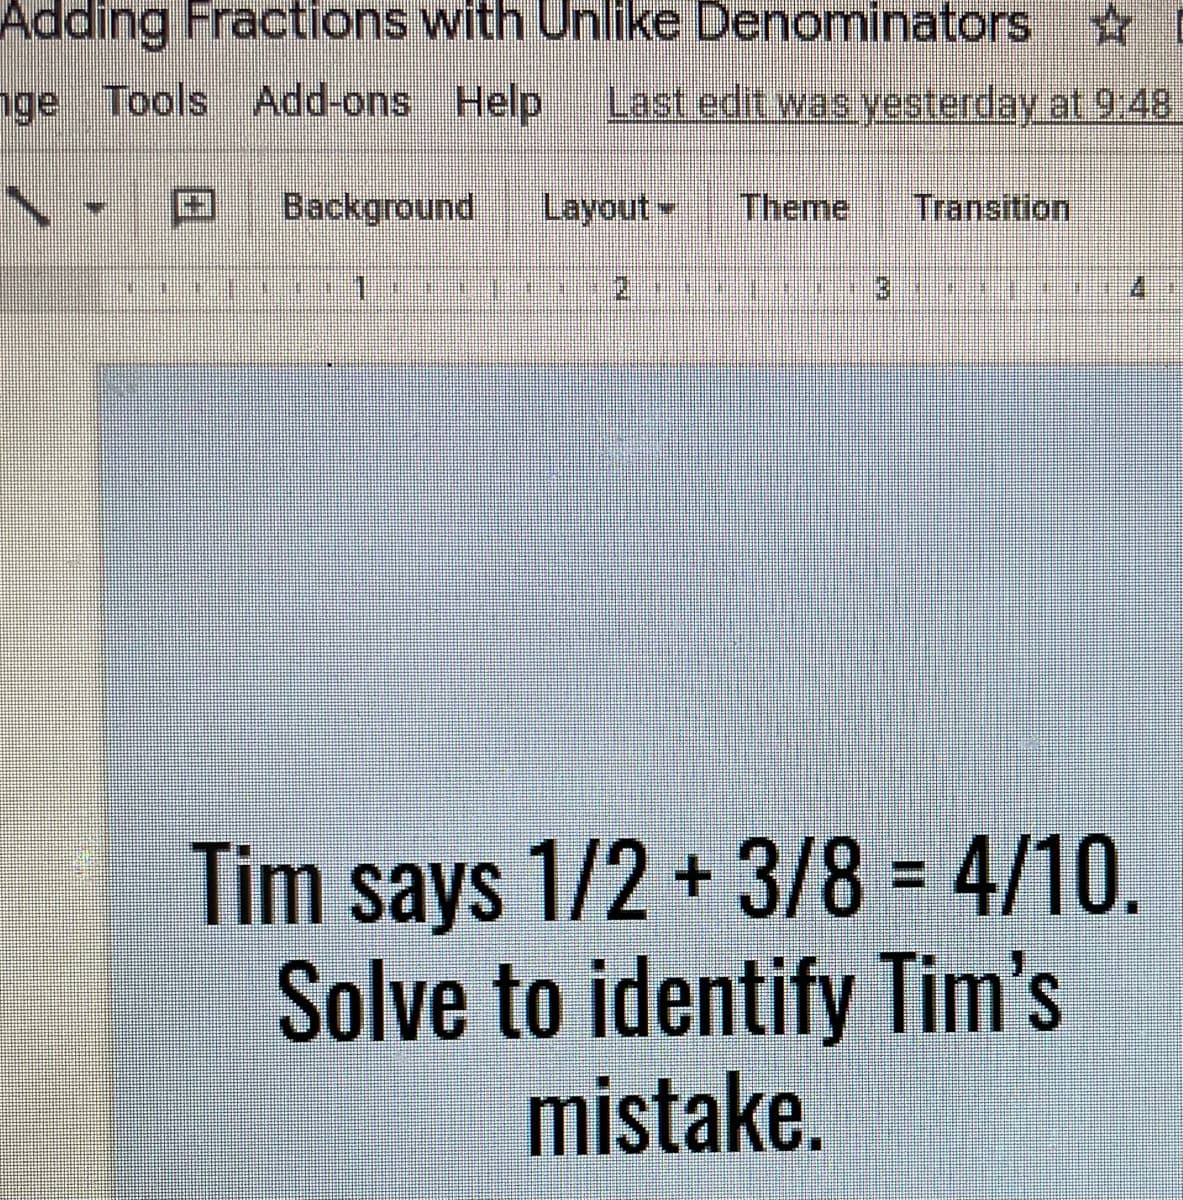 Adding Fractions with Unlike Denominators
nge Tools Add-ons Help
Last edit was yesterday at 9:48
Background
Layout
Theme
Transition
2.
Tim says 1/2 + 3/8 = 4/10.
Solve to identify Tim's
mistake.
